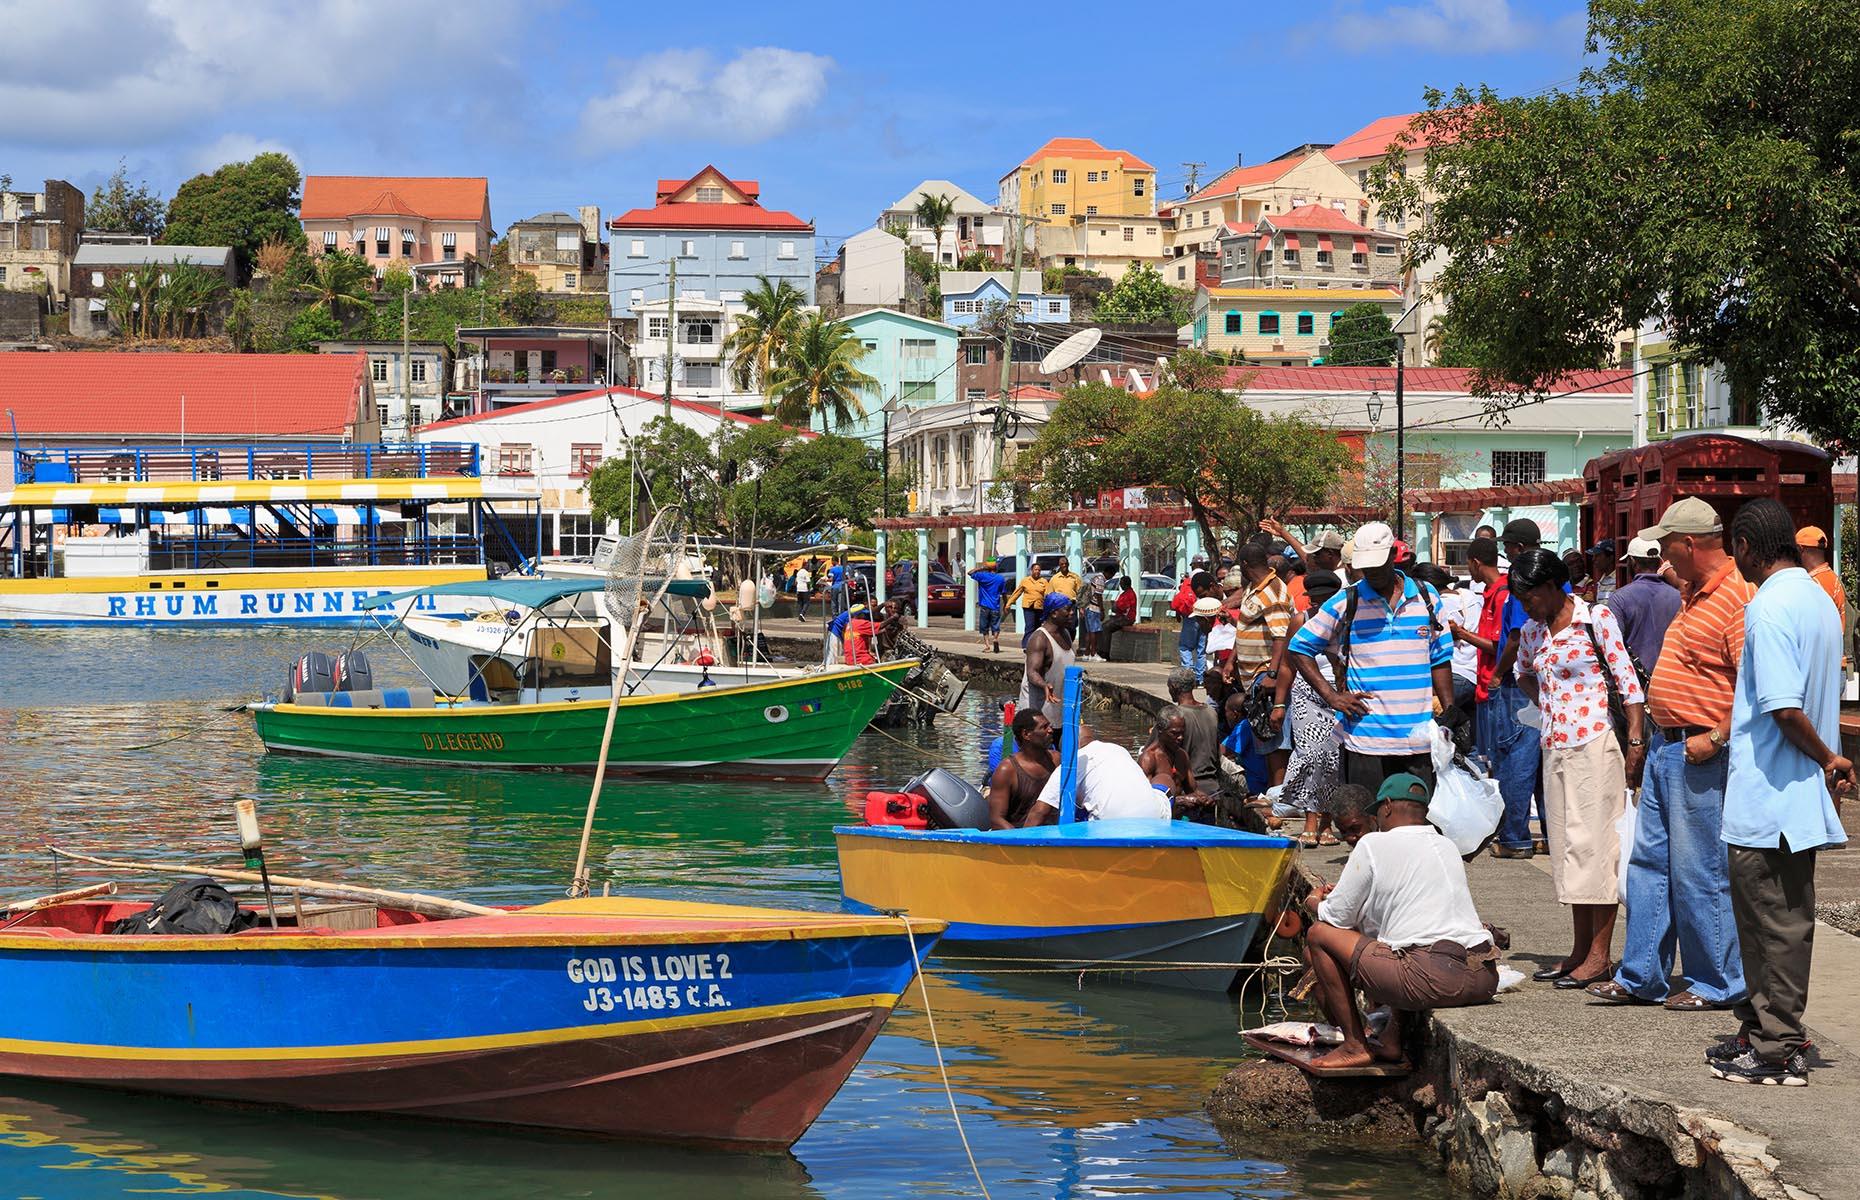 <p>St George’s is the colorful capital of <a href="http://www.loveexploring.com/guides/76771/guide-to-grenada-caribbean-green-list-2021">Grenada</a>, wrapped around one of the best natural harbors in the Caribbean. Here, in the old town in particular, life goes on as it always has, among historic buildings and a waterfront that retains its bygone charms. Explore 18th-century forts, check out the Grenada National Museum or simply use this charming town as a base to explore the waterfalls and forests of the lush, mountainous interior. Gorgeous Grand Anse Beach is just a water taxi ride away too.</p>